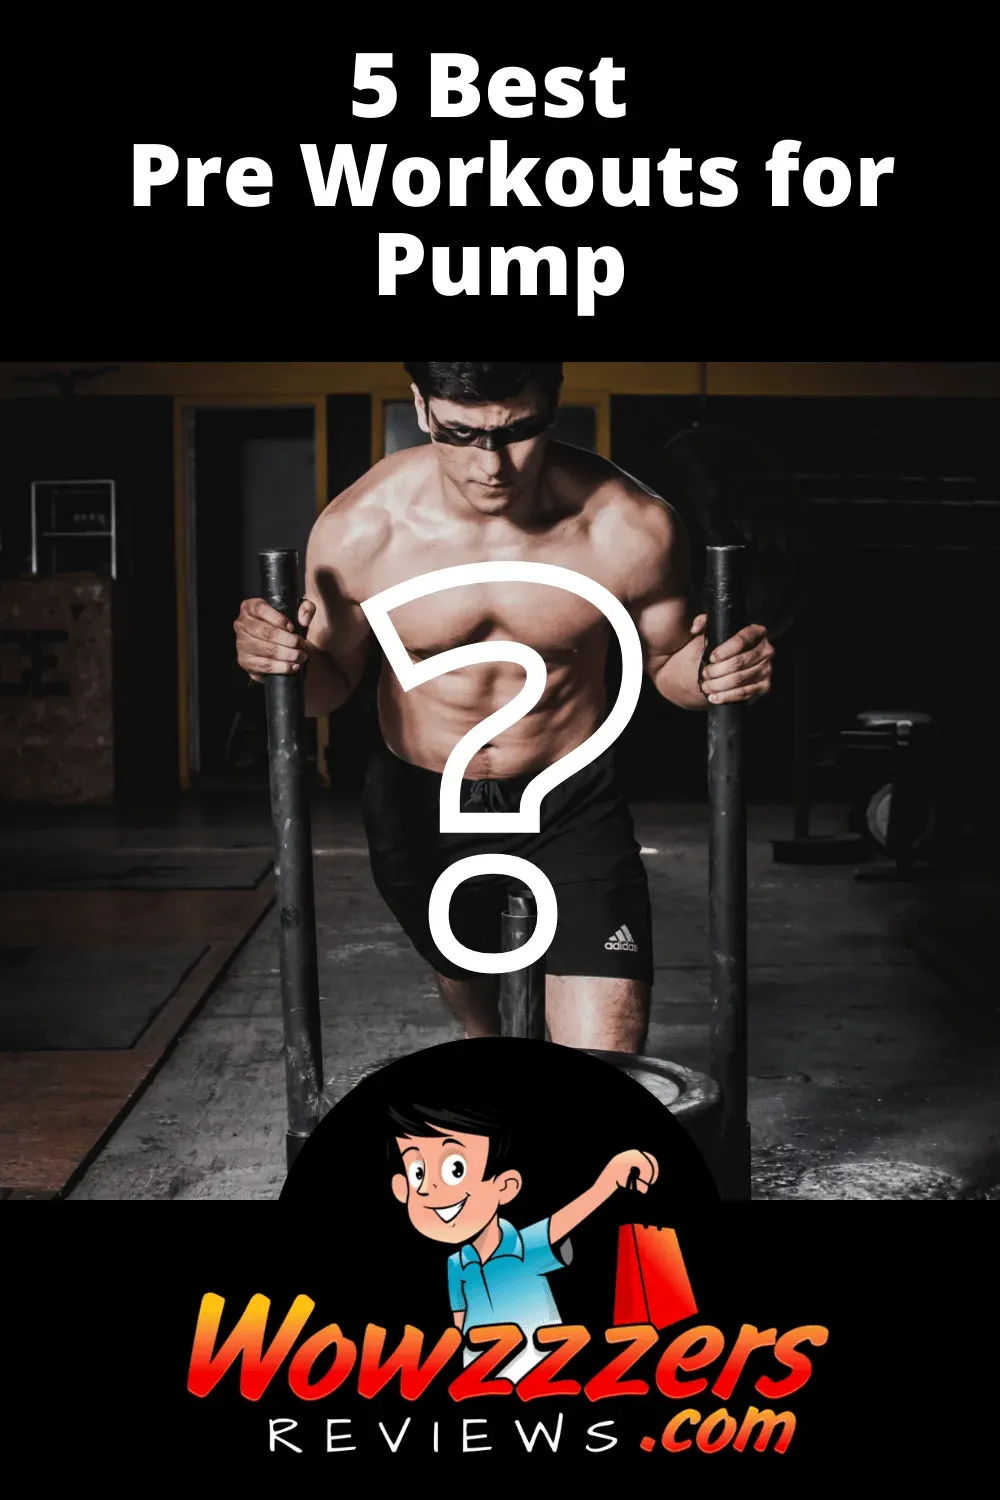 Best Pre Workout for Pump